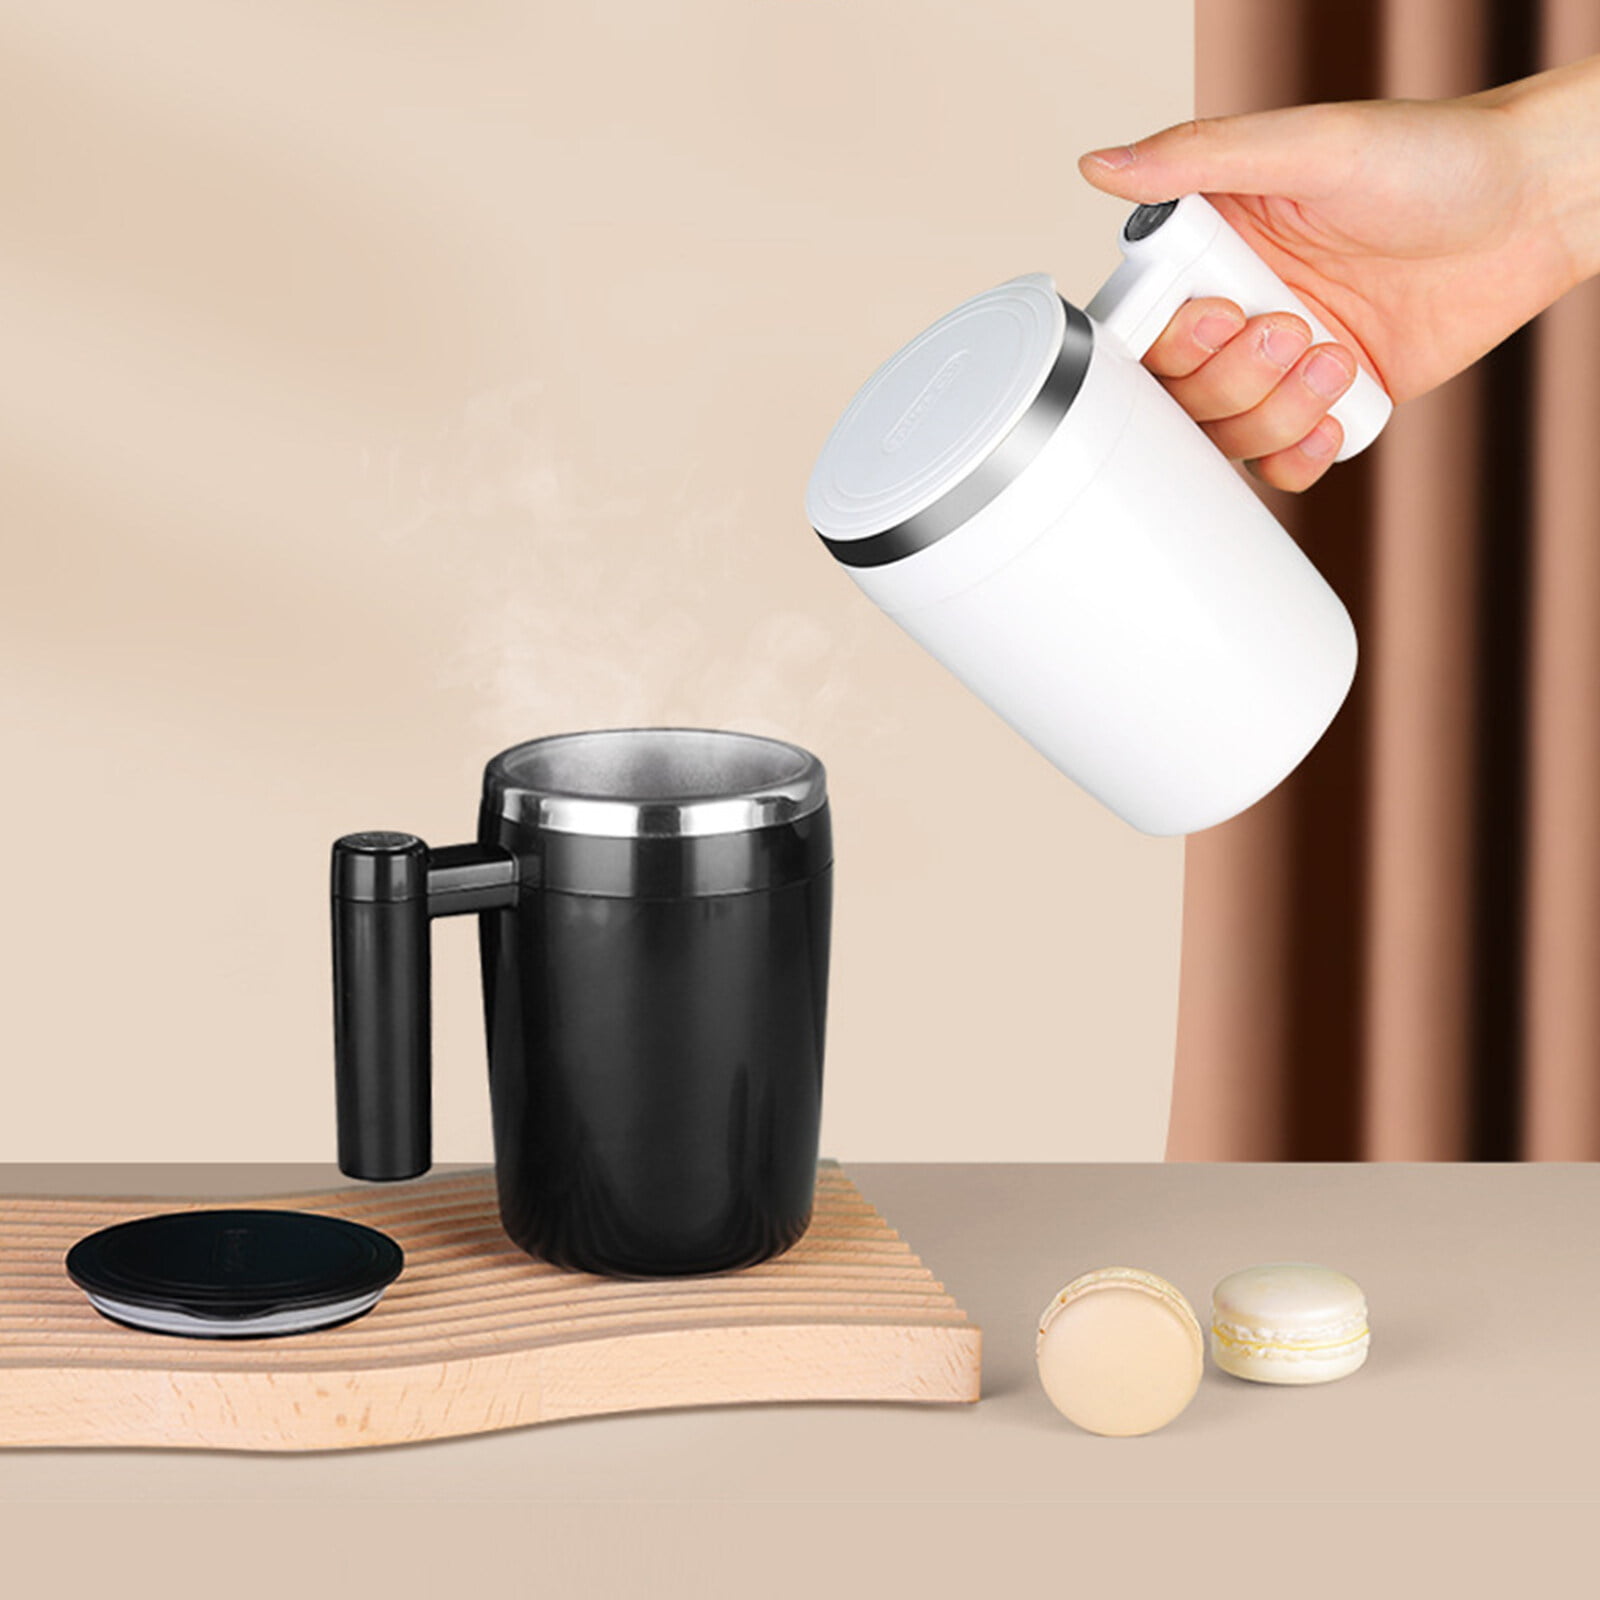 380ml Automatic Self Stirring Mug Coffee Milk Fruits Mixing Cup Electric  Stainless Steel Lazy Rotating Mug Magnetic Stirring Cup.